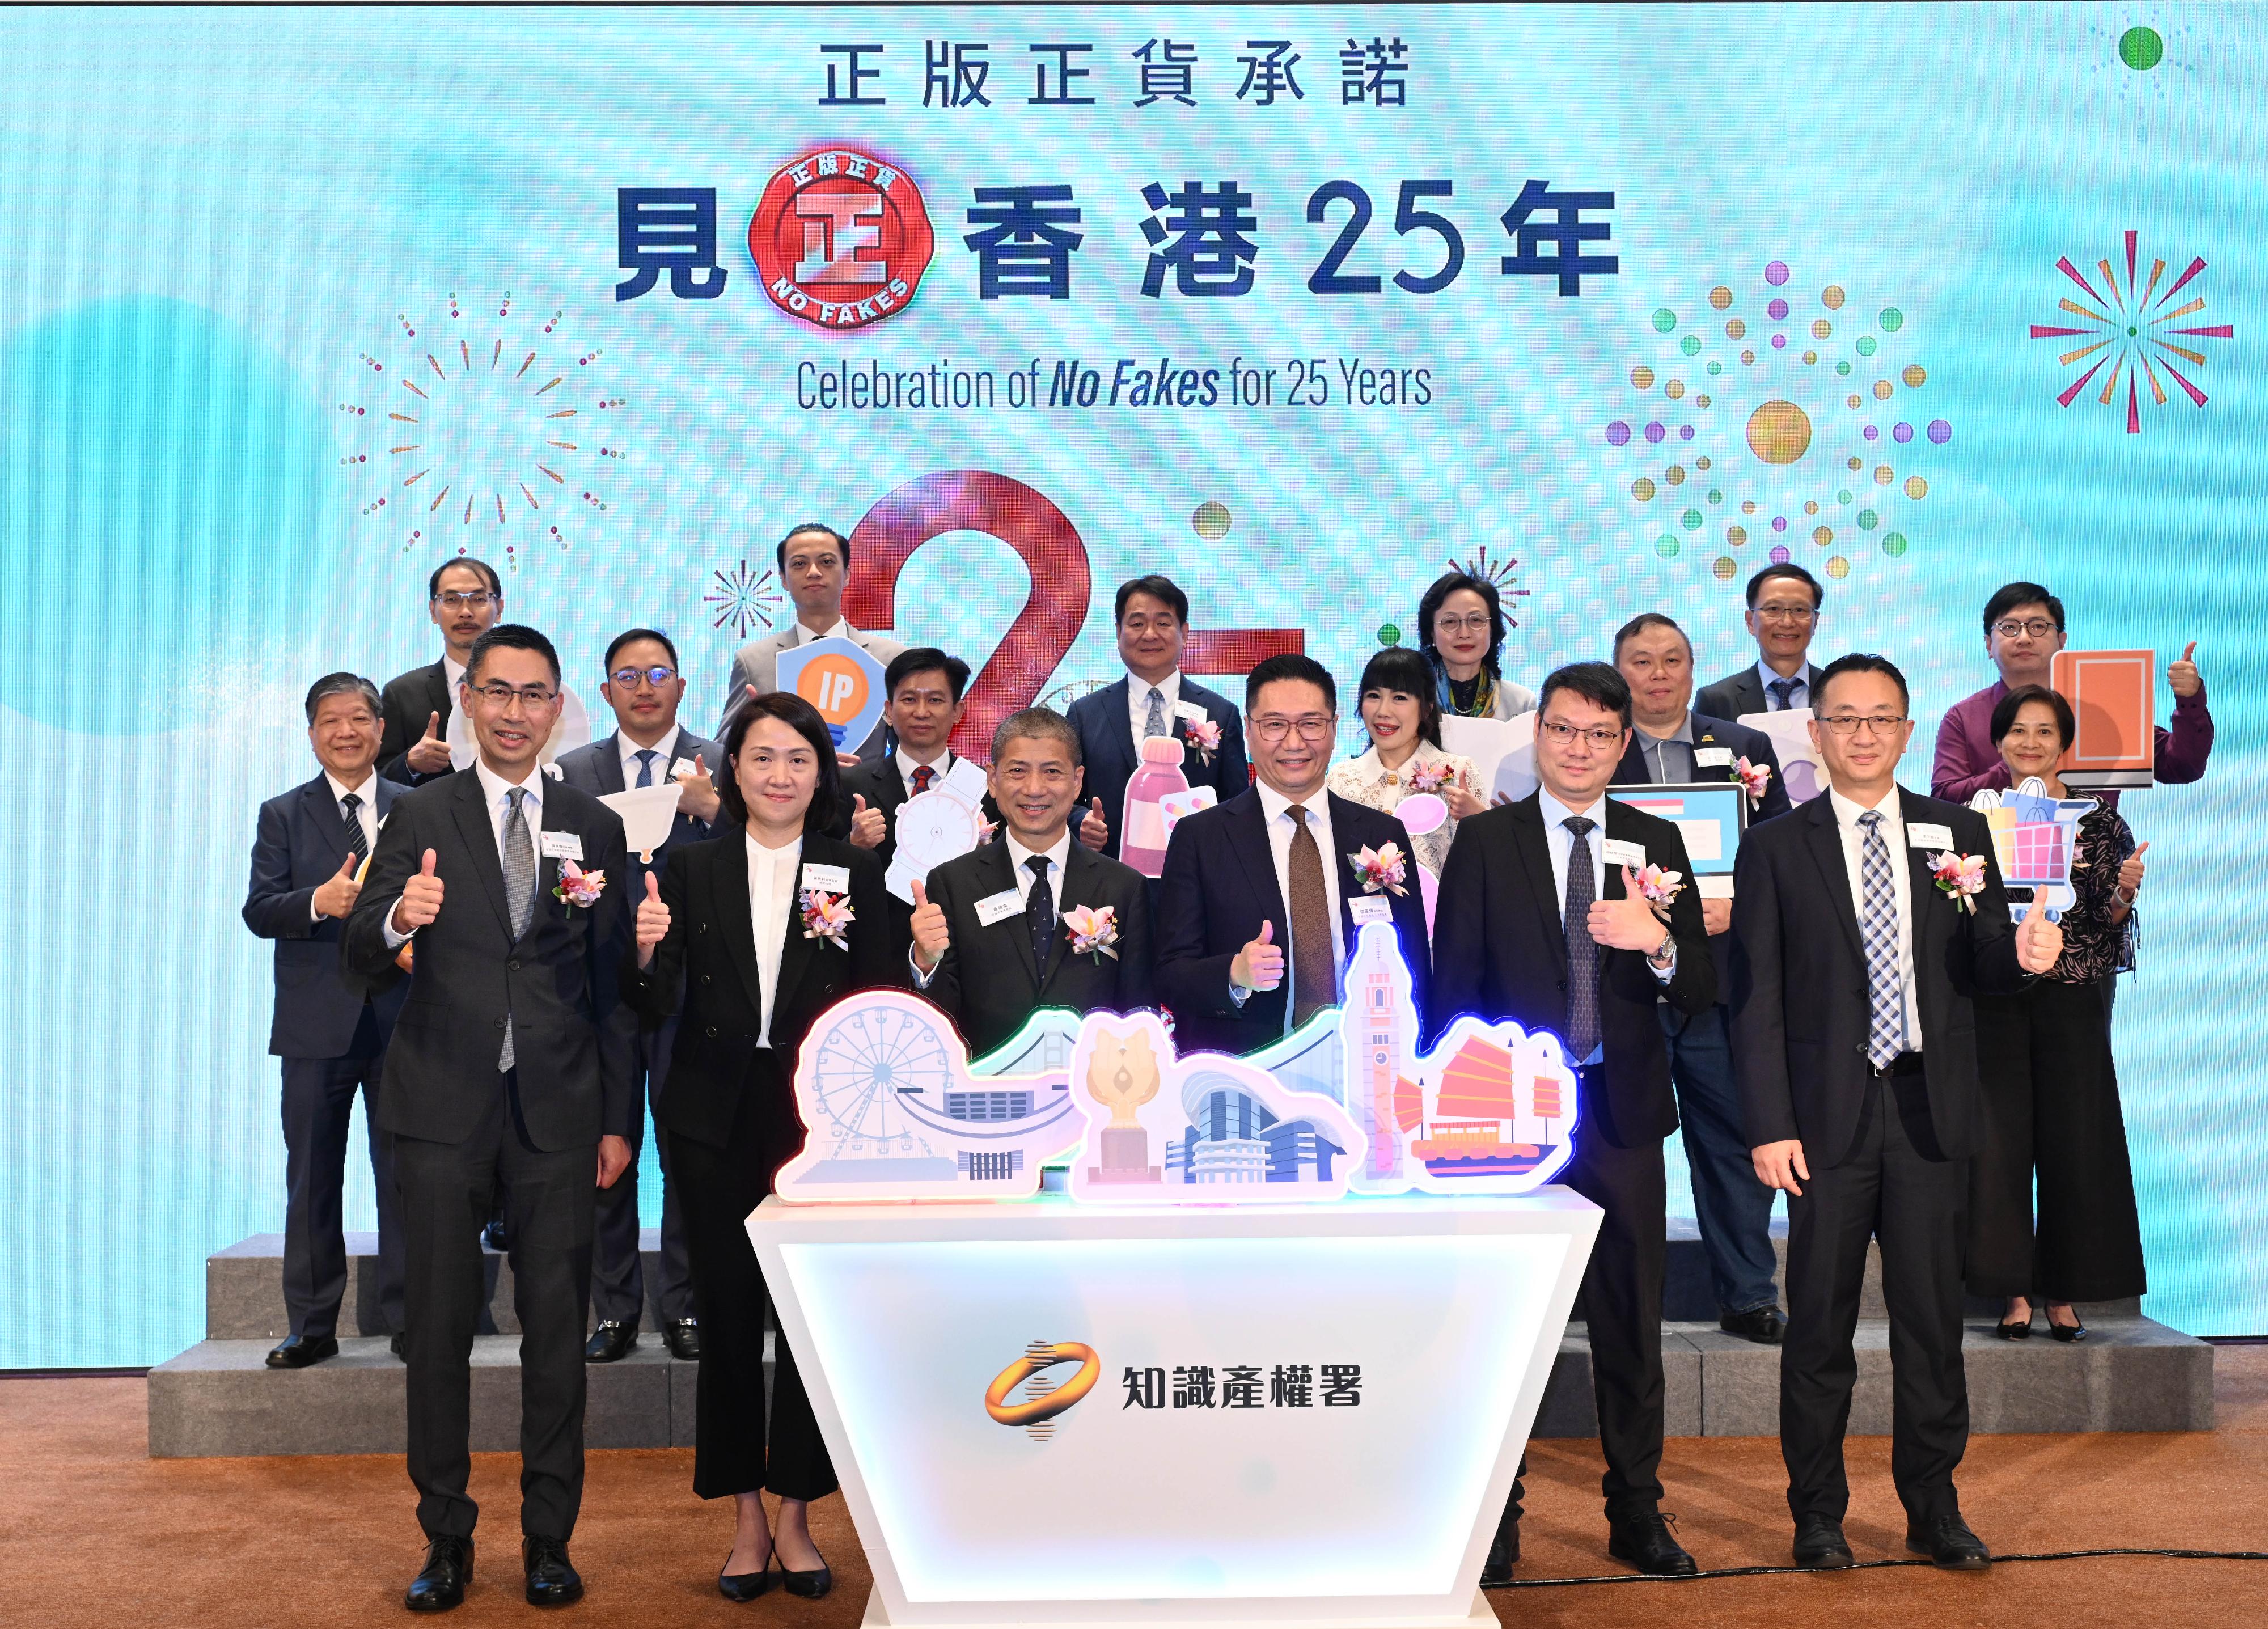 The Director of Intellectual Property, Mr David Wong (third left), Legislative Council Member Mr Shiu Ka-fai (third right) and representatives of issuing bodies and supporting organisations attended the 25th Anniversary Celebration of the "No Fakes Pledge" Scheme cum Long-term Members Commendation Ceremony today (September 6).